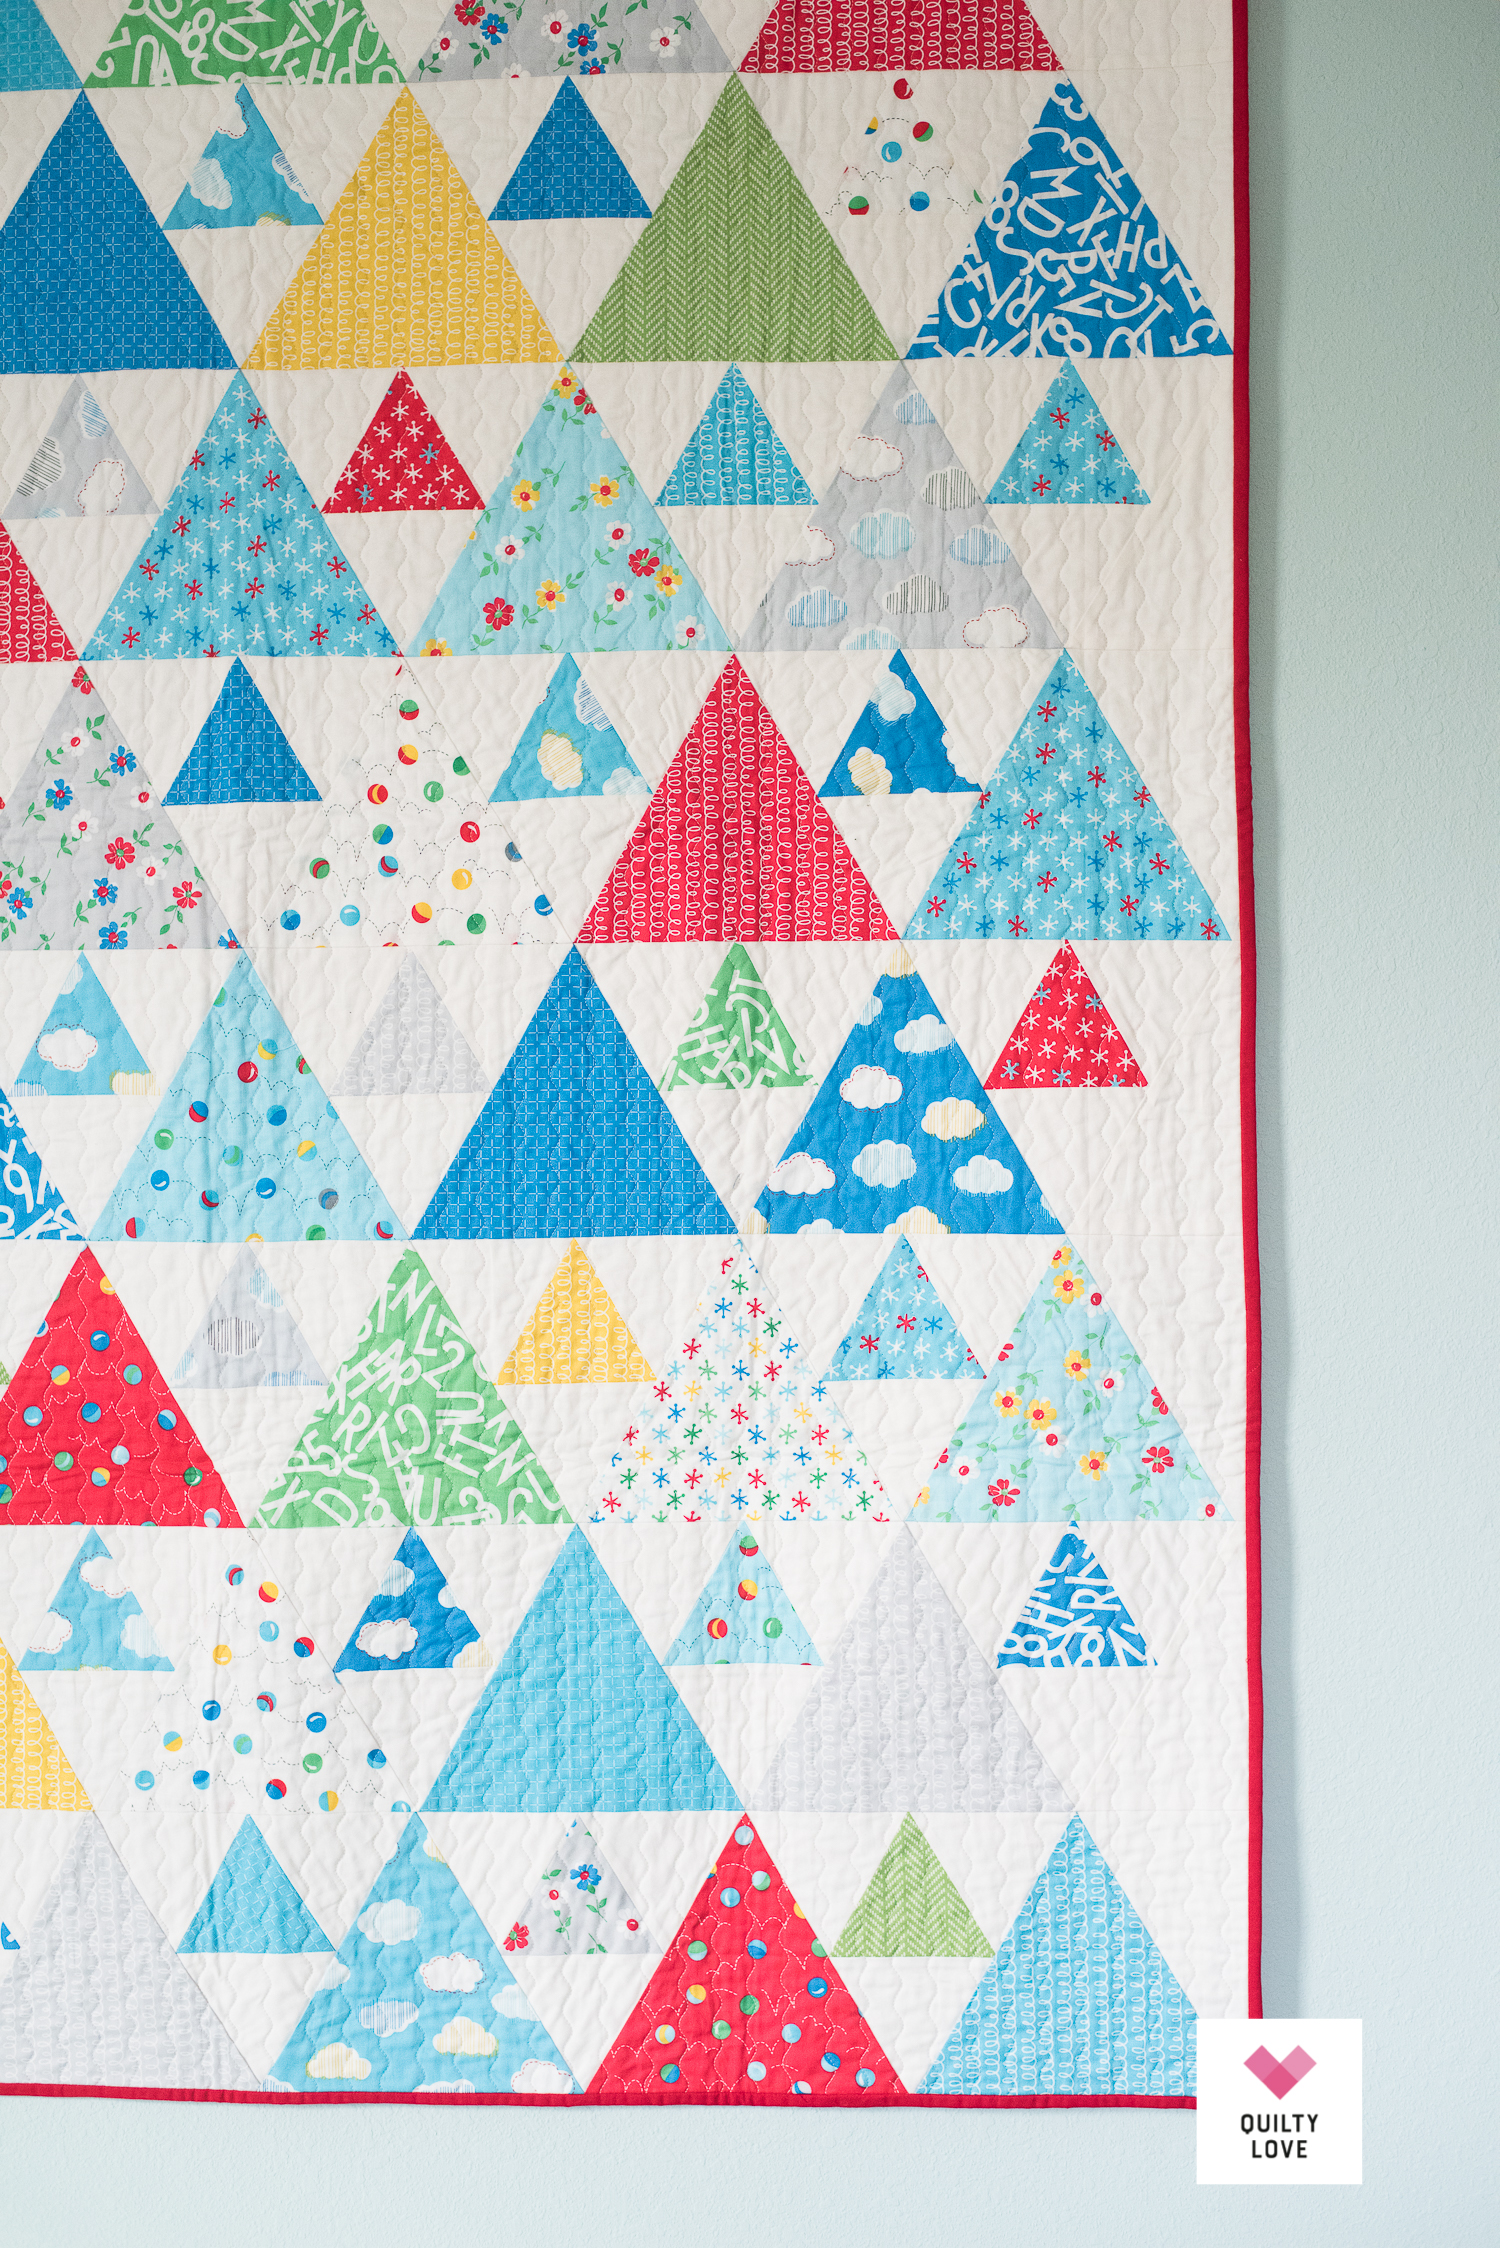 Bounce Triangle Peaks by QuiltyLove